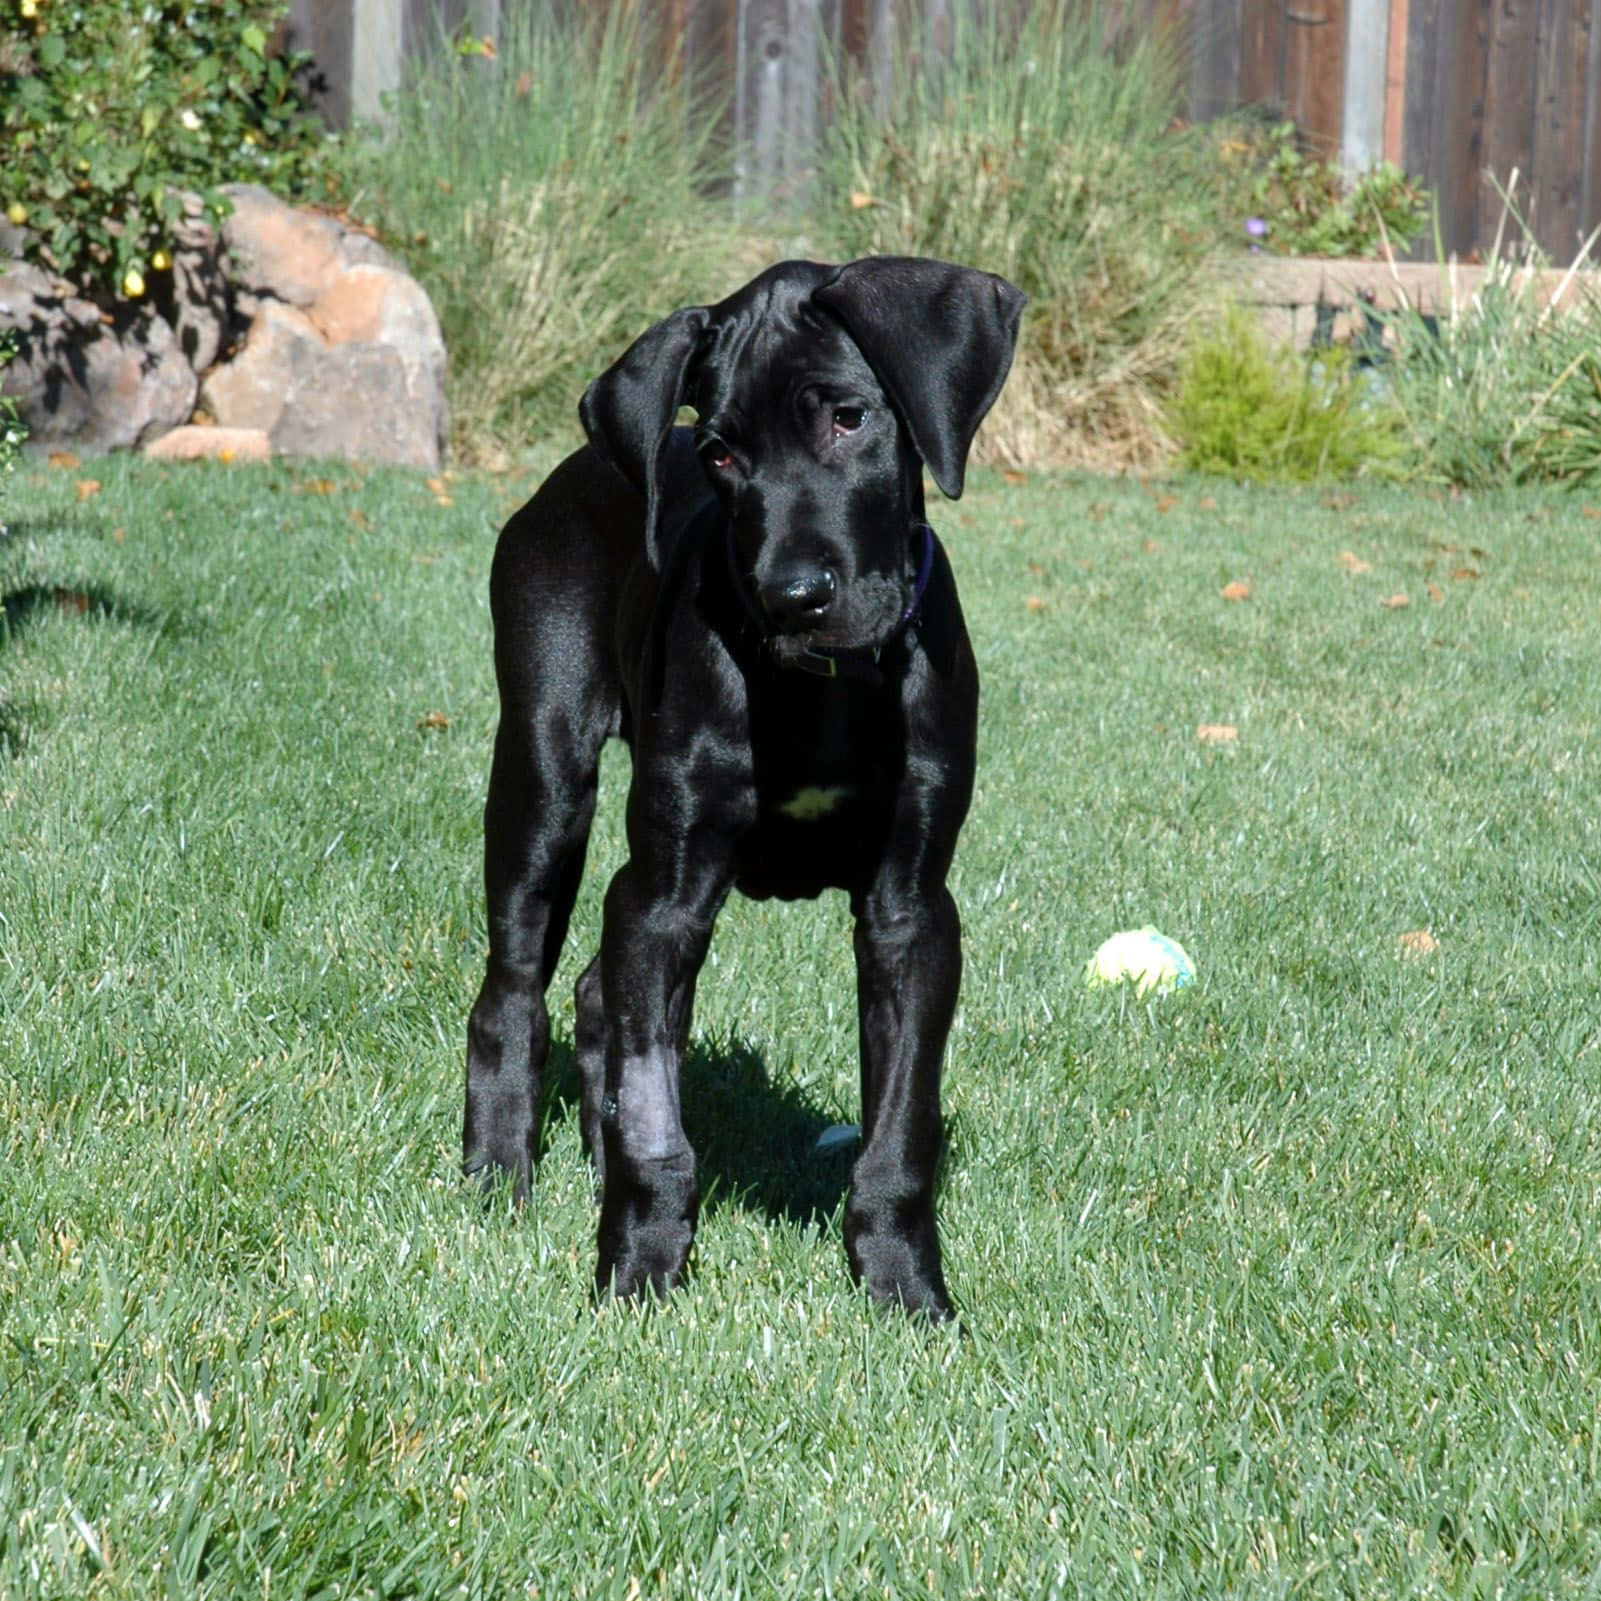 A Black Dog Standing In The Grass